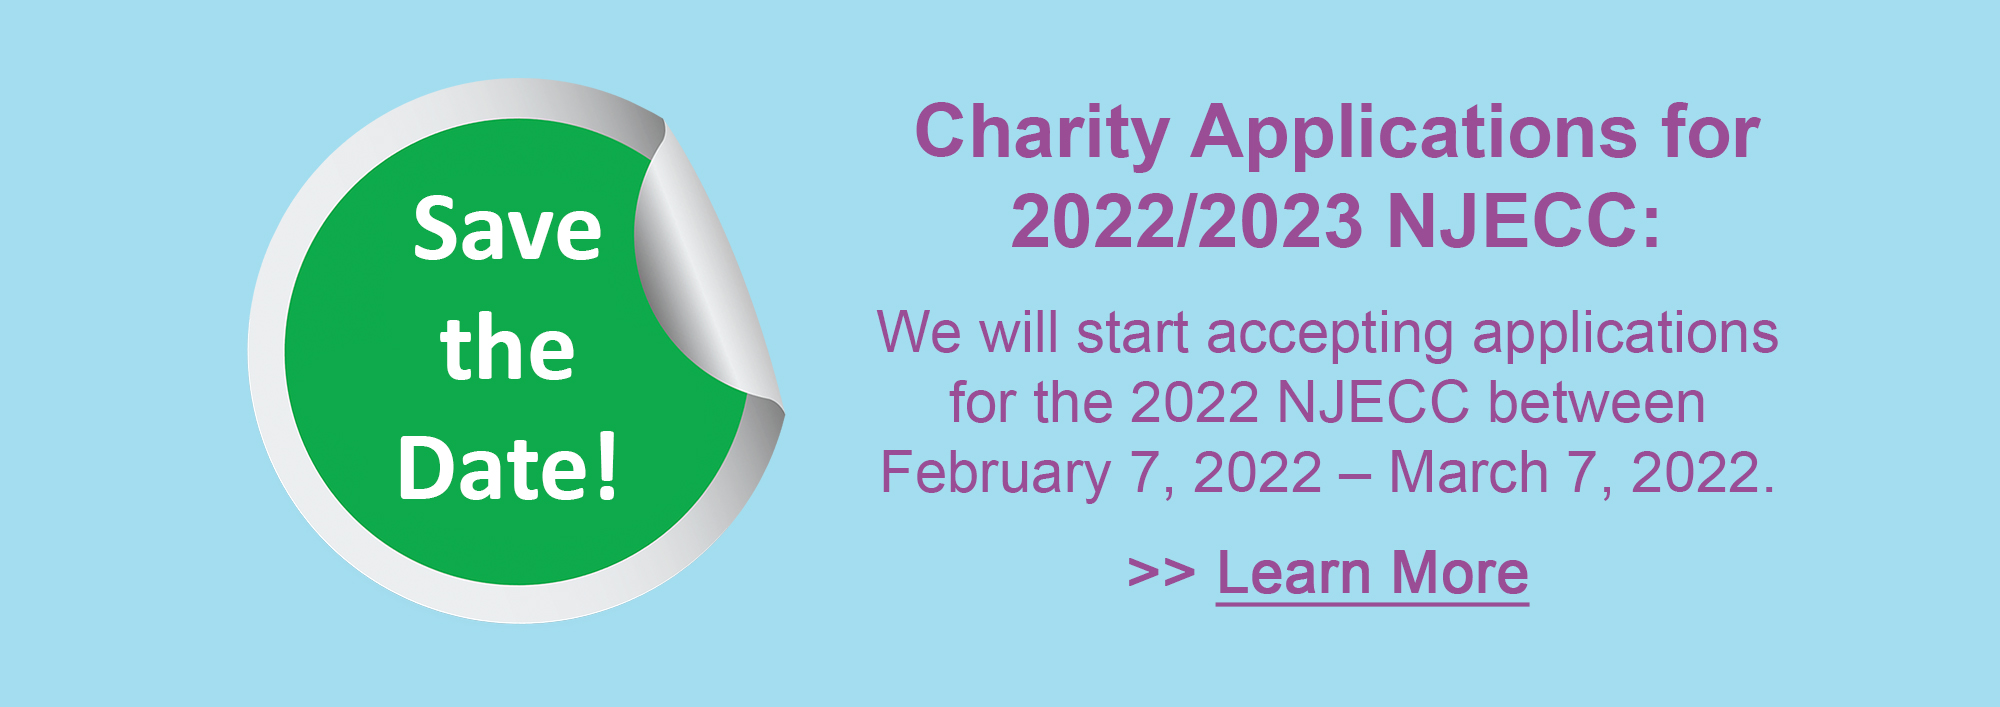 Charity applications for the 2022-2023 NJECC